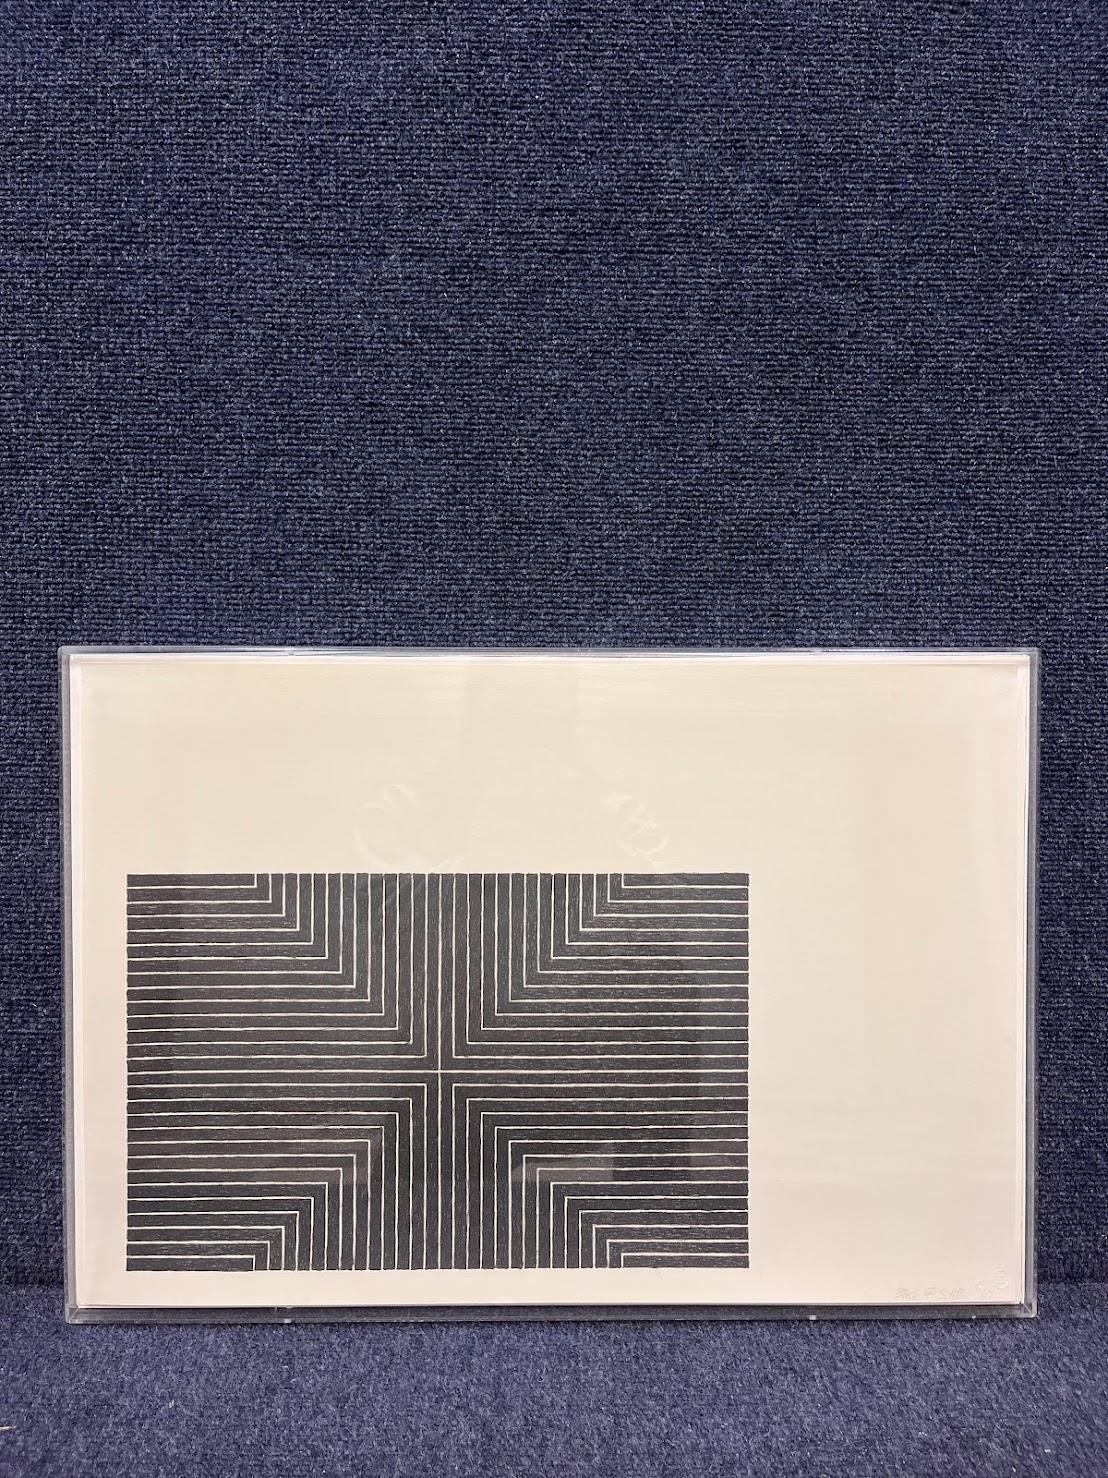 FRANK STELLA (1936-Present)

Lithograph in black on J. Barcham Green wove paper, conceived in 1967, from the portfolio of 9 lithographs 'Black Series I'. Signed, dated and numbered 70 from the edition of 100 prints. Published by Gemini G.E.L., Los